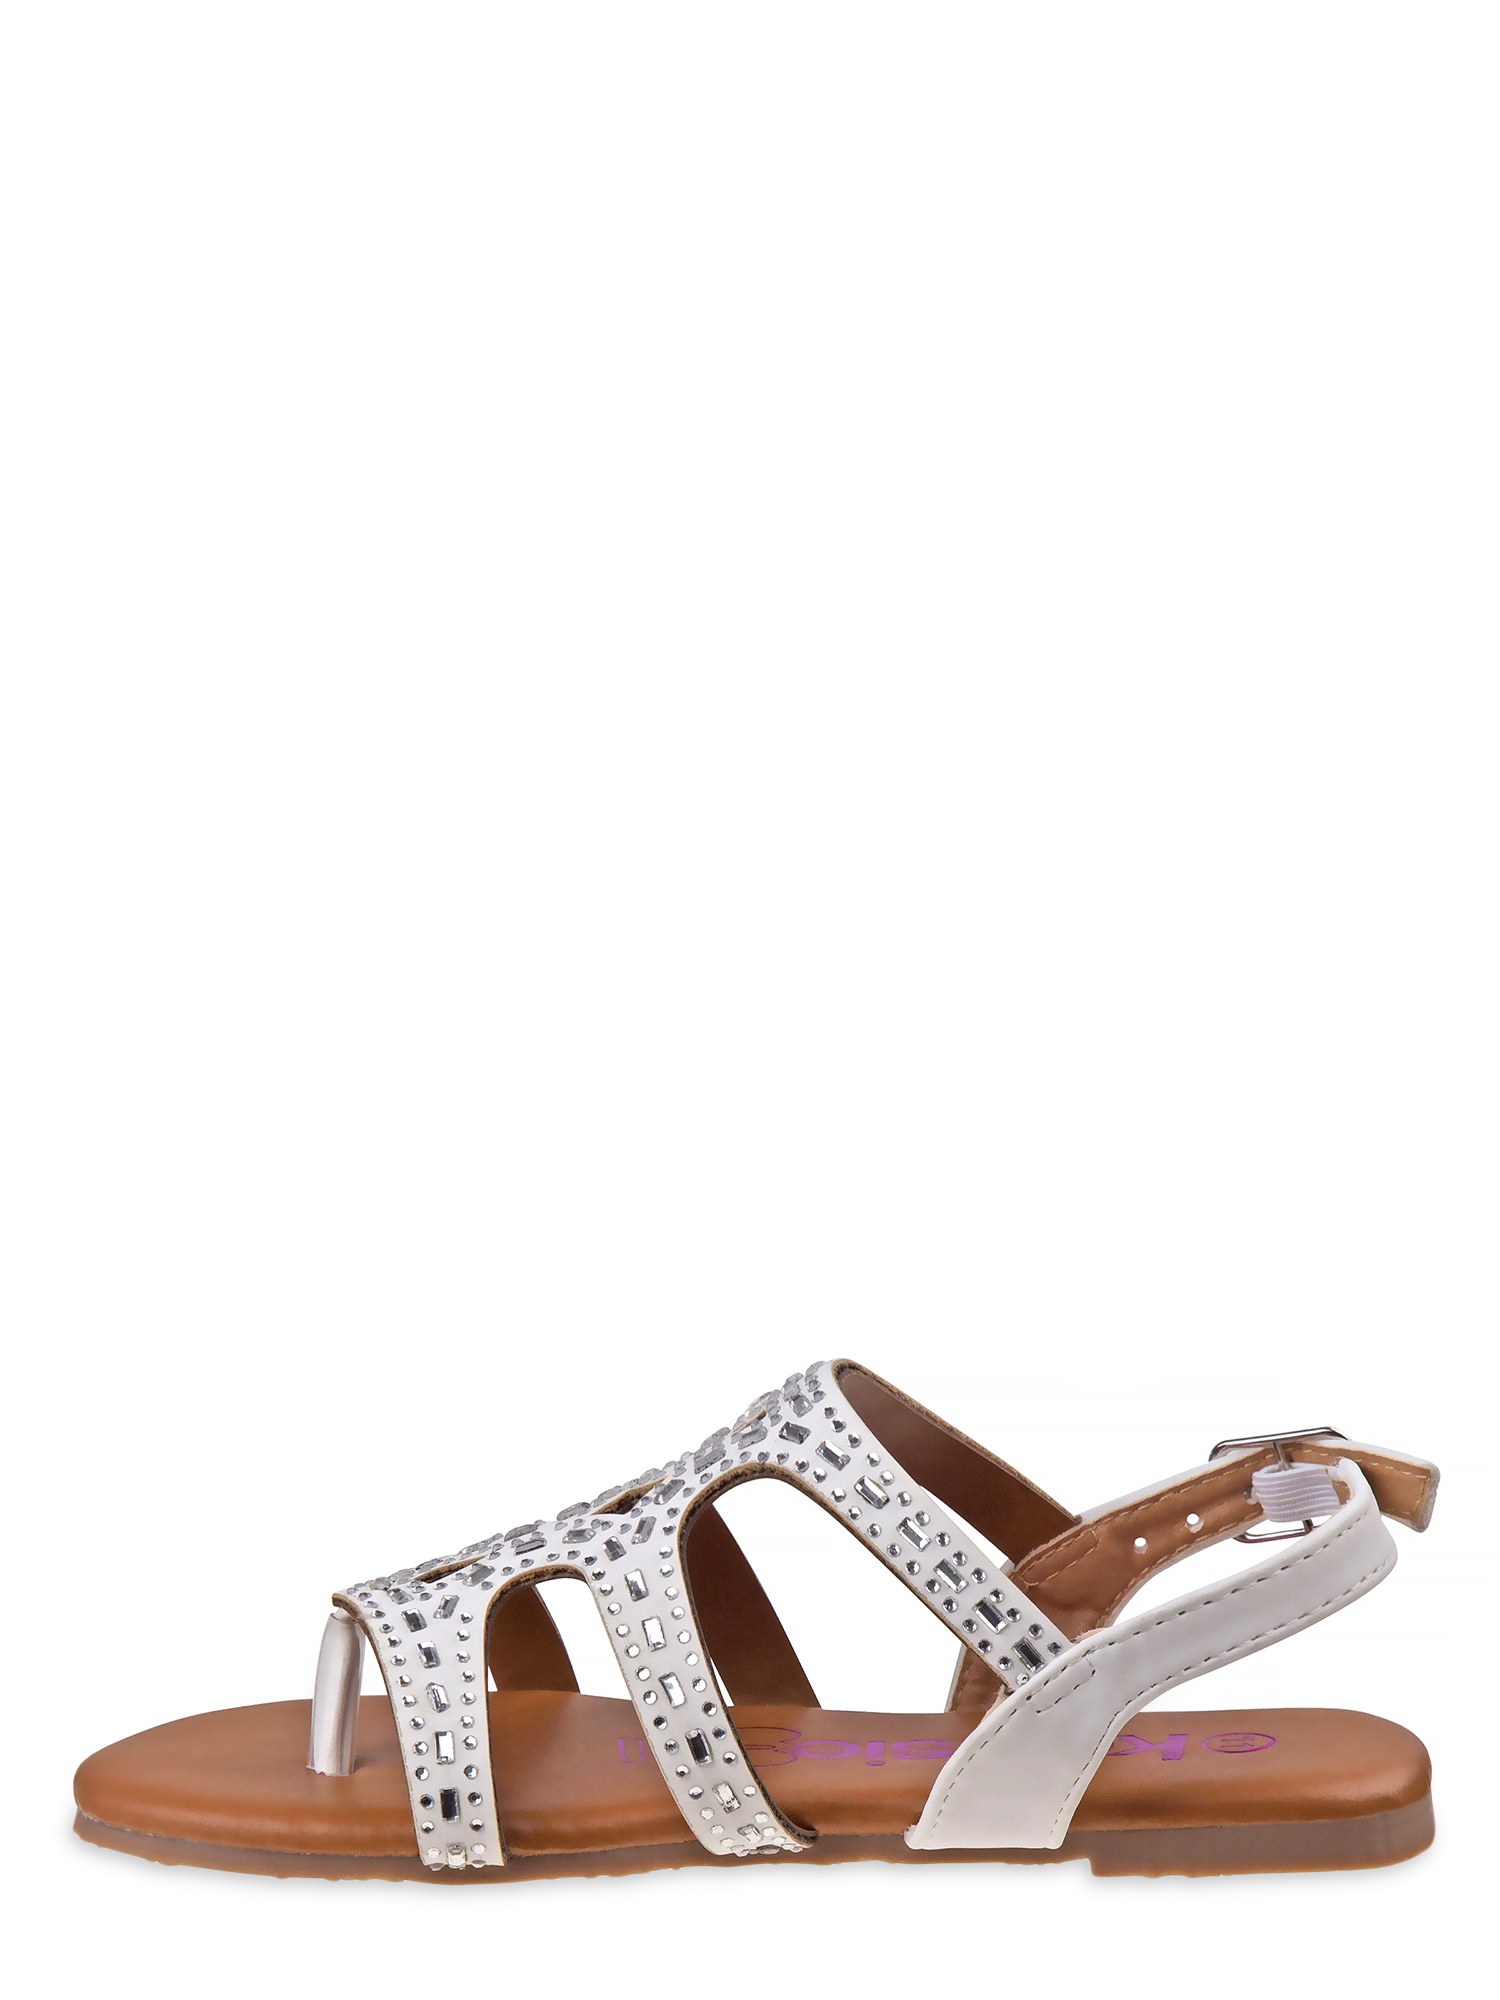 Kensie Girl open-toe Glitter Stud Encrusted Strappy Sandals - image 3 of 5